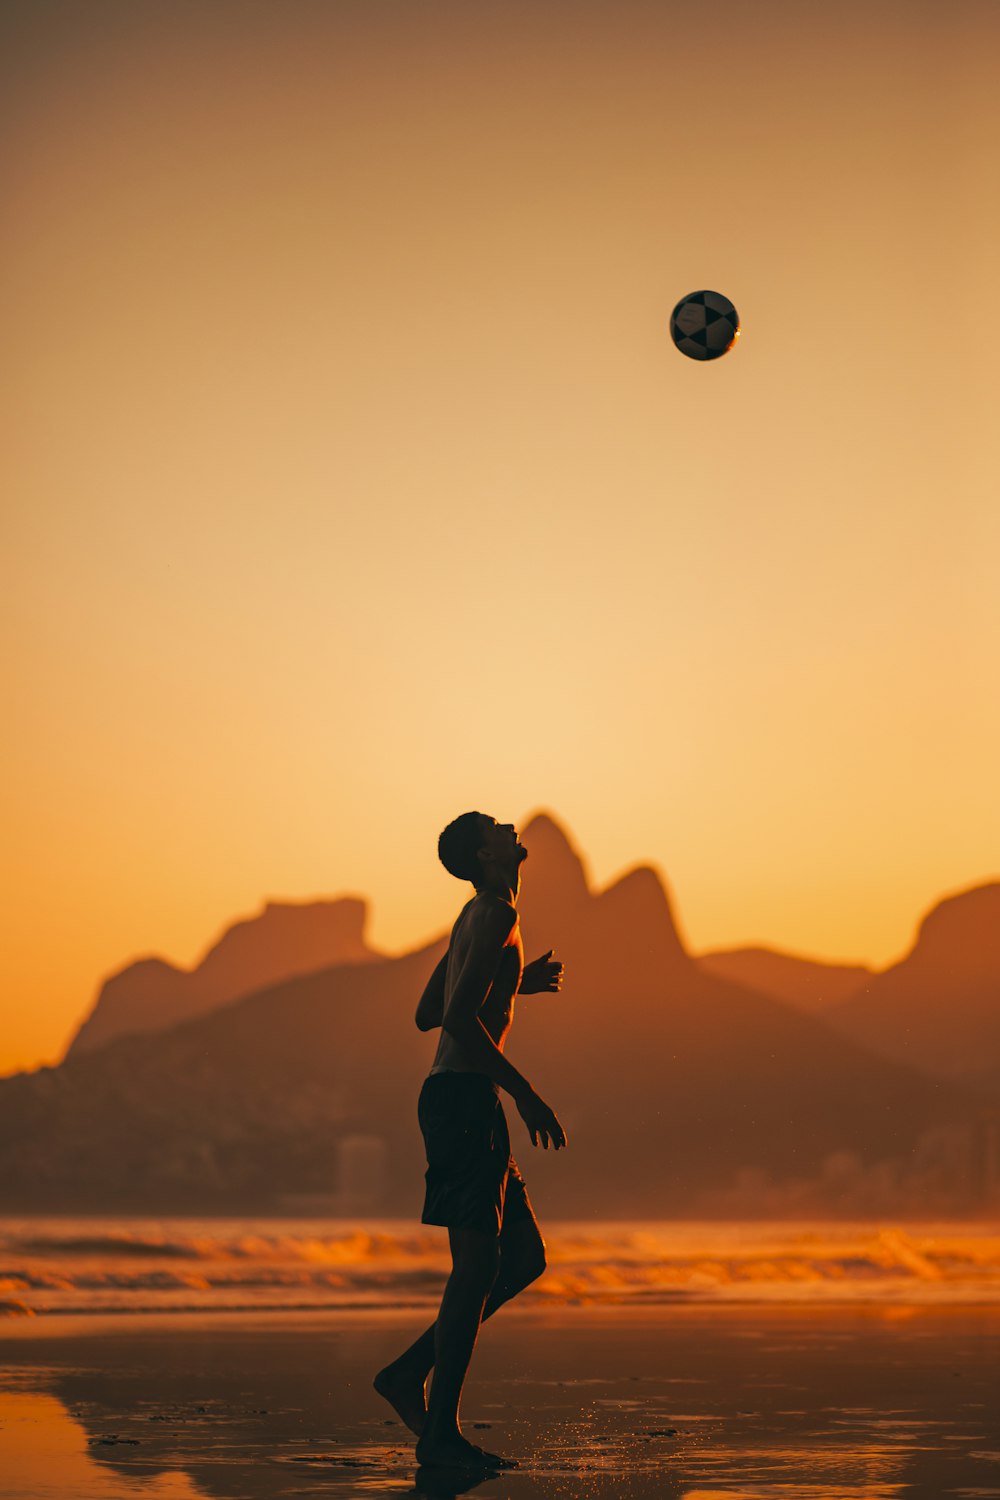 a man and woman playing with a ball on a beach